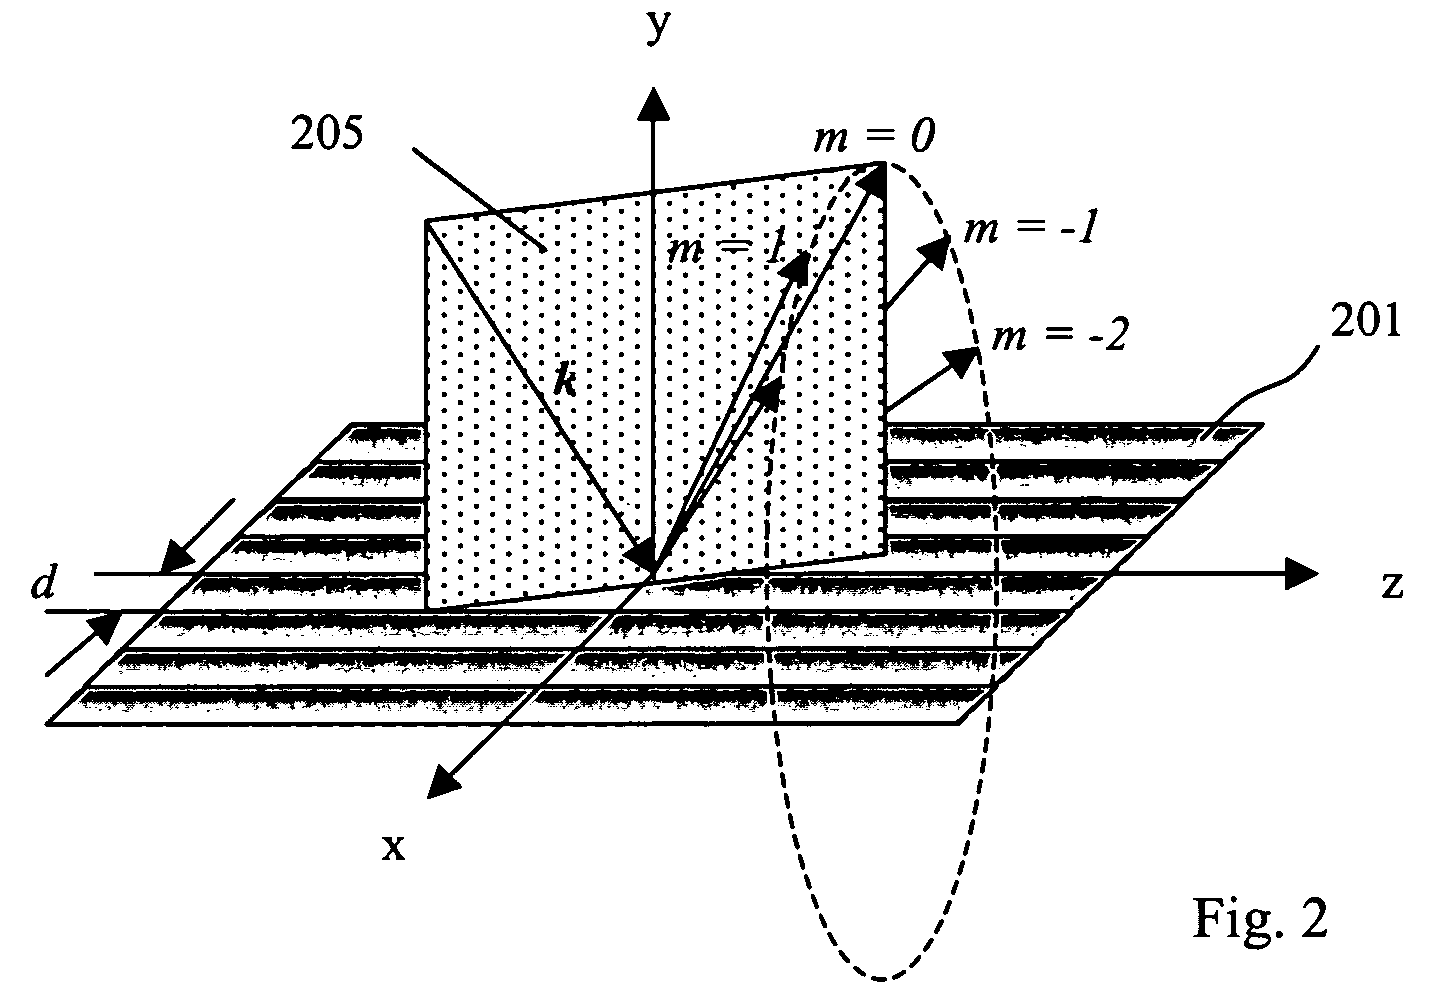 Cross-dispersed spectrometer in a spectral domain optical coherence tomography system